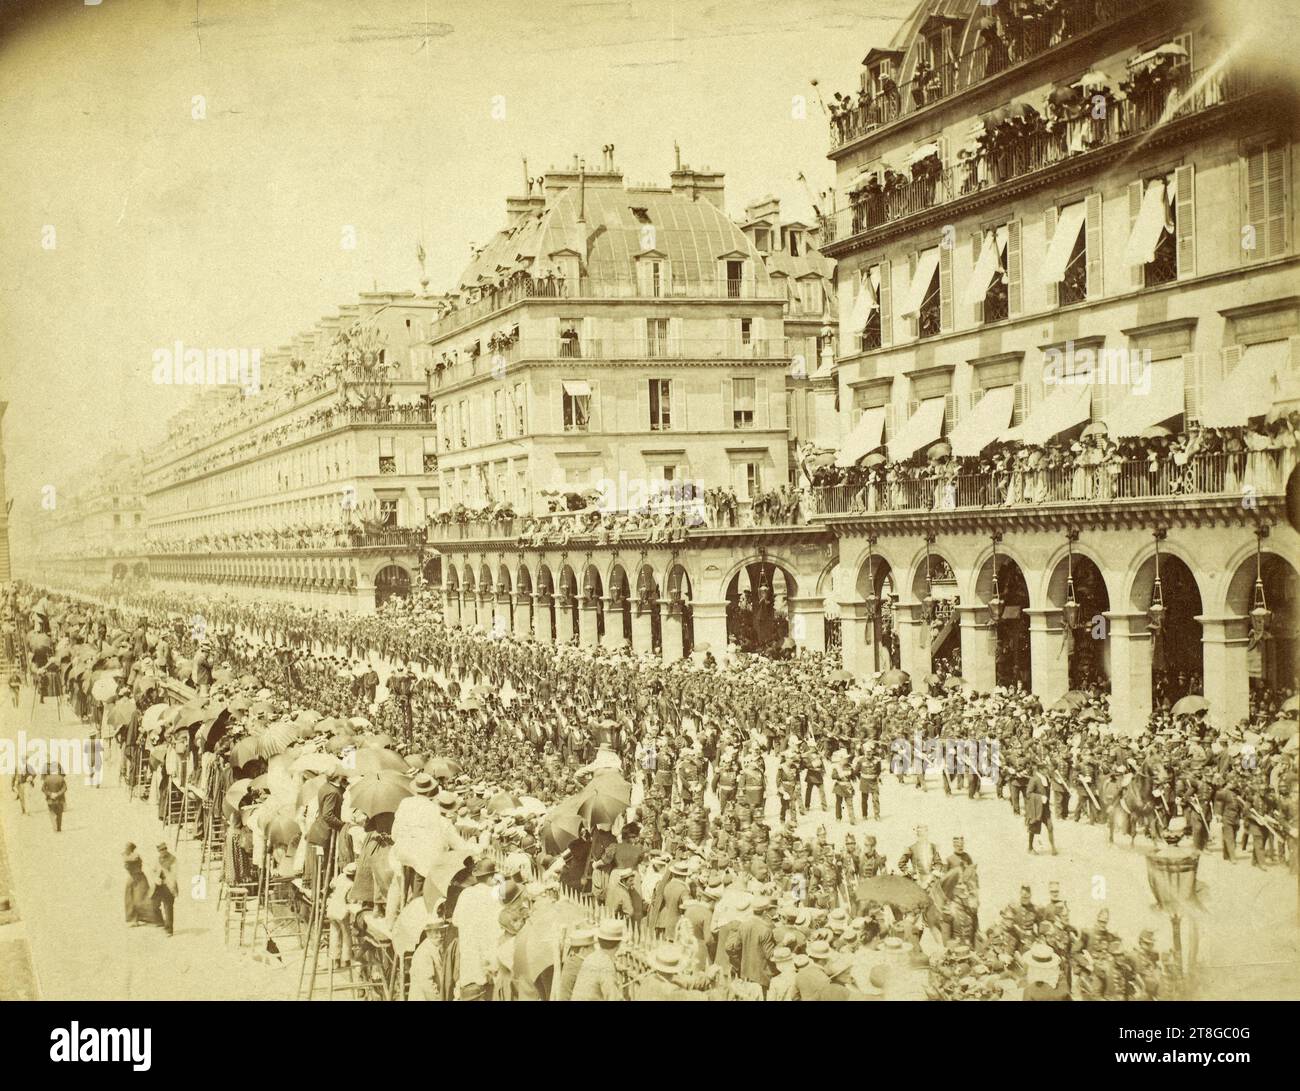 The funeral of Victor Hugo, part two of the national event: the passage of the procession of officials on rue de Rivoli, 1st arrondissement, Paris, June 1, 1885, Photographer, In 1885, Photography, Graphic arts, Photography, Dimensions - Work: Height: 21 cm, Width: 27 cm Stock Photo